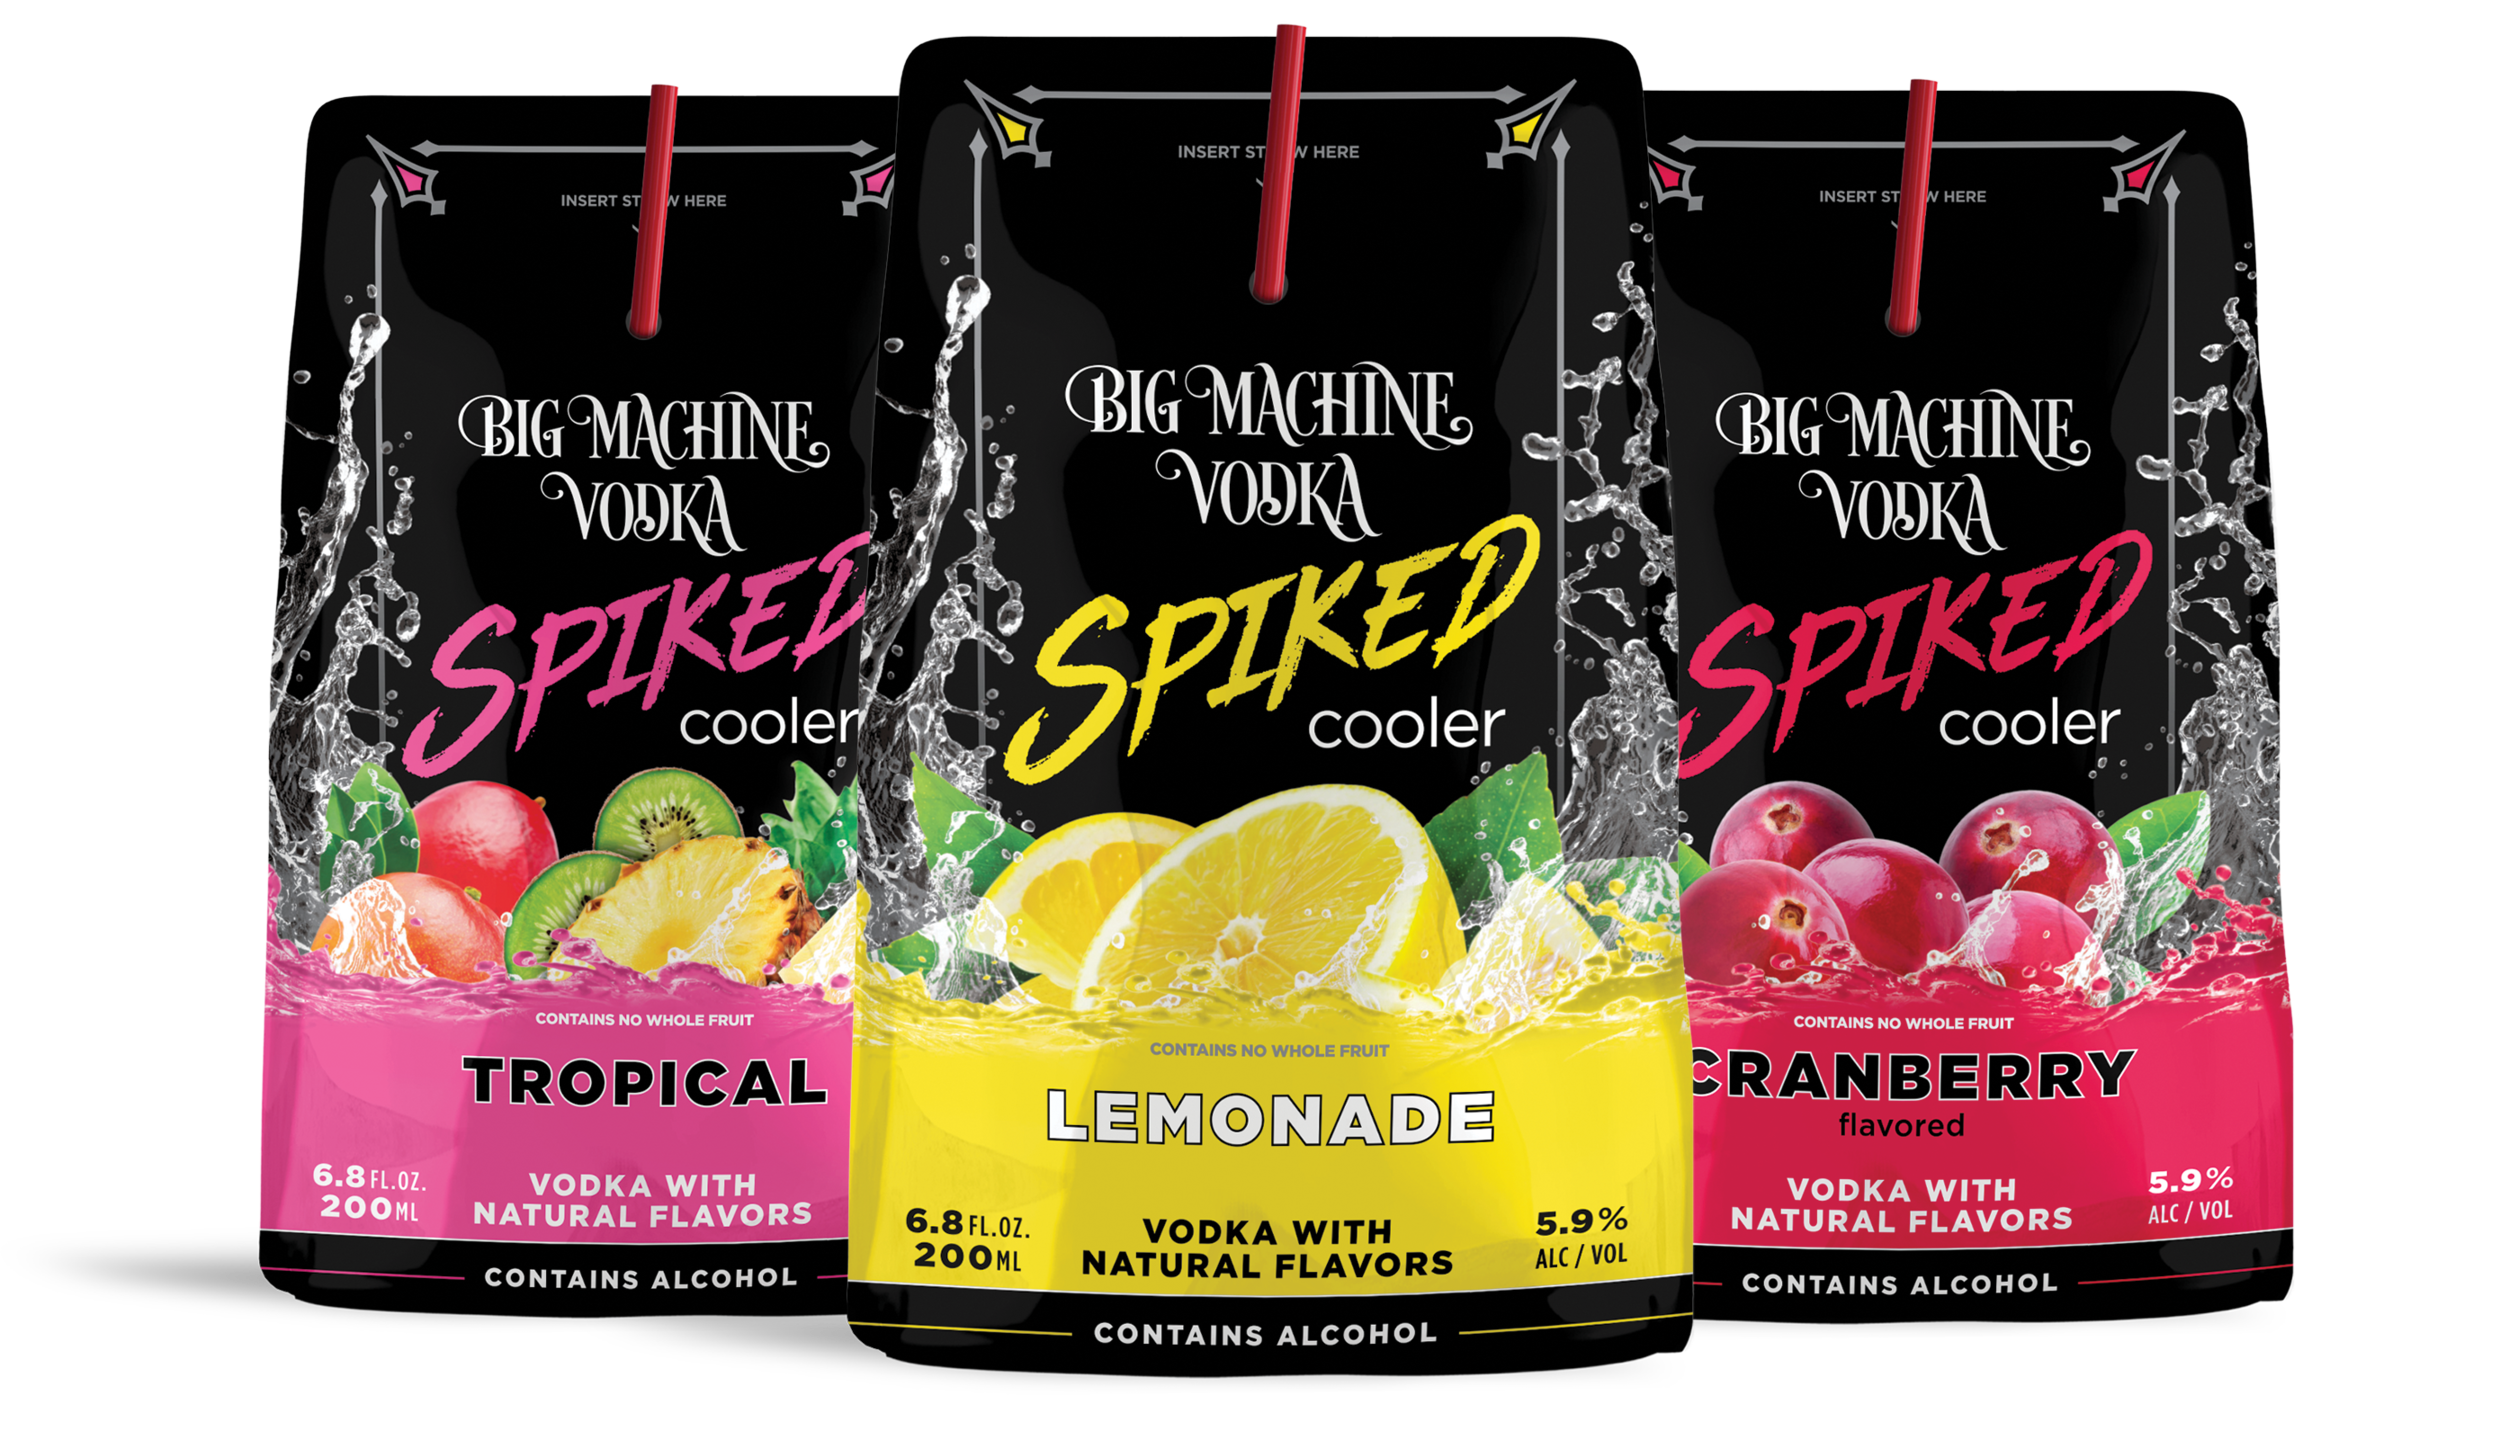 Clancy Decline select Spiked Coolers